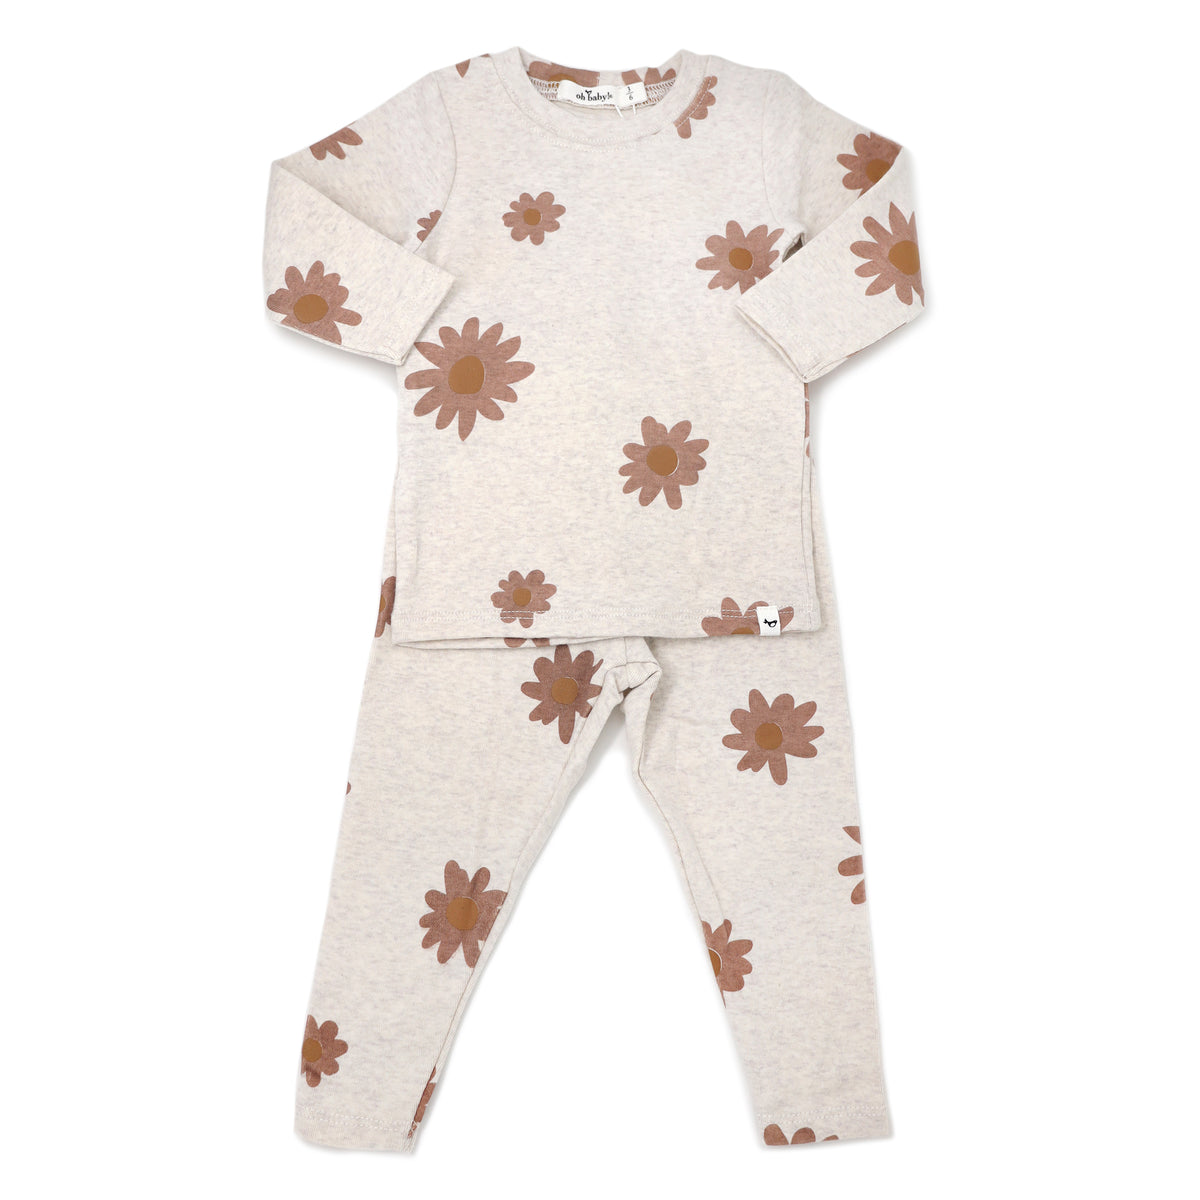 oh baby! Two Piece Set - Autumn Daisies - Sand